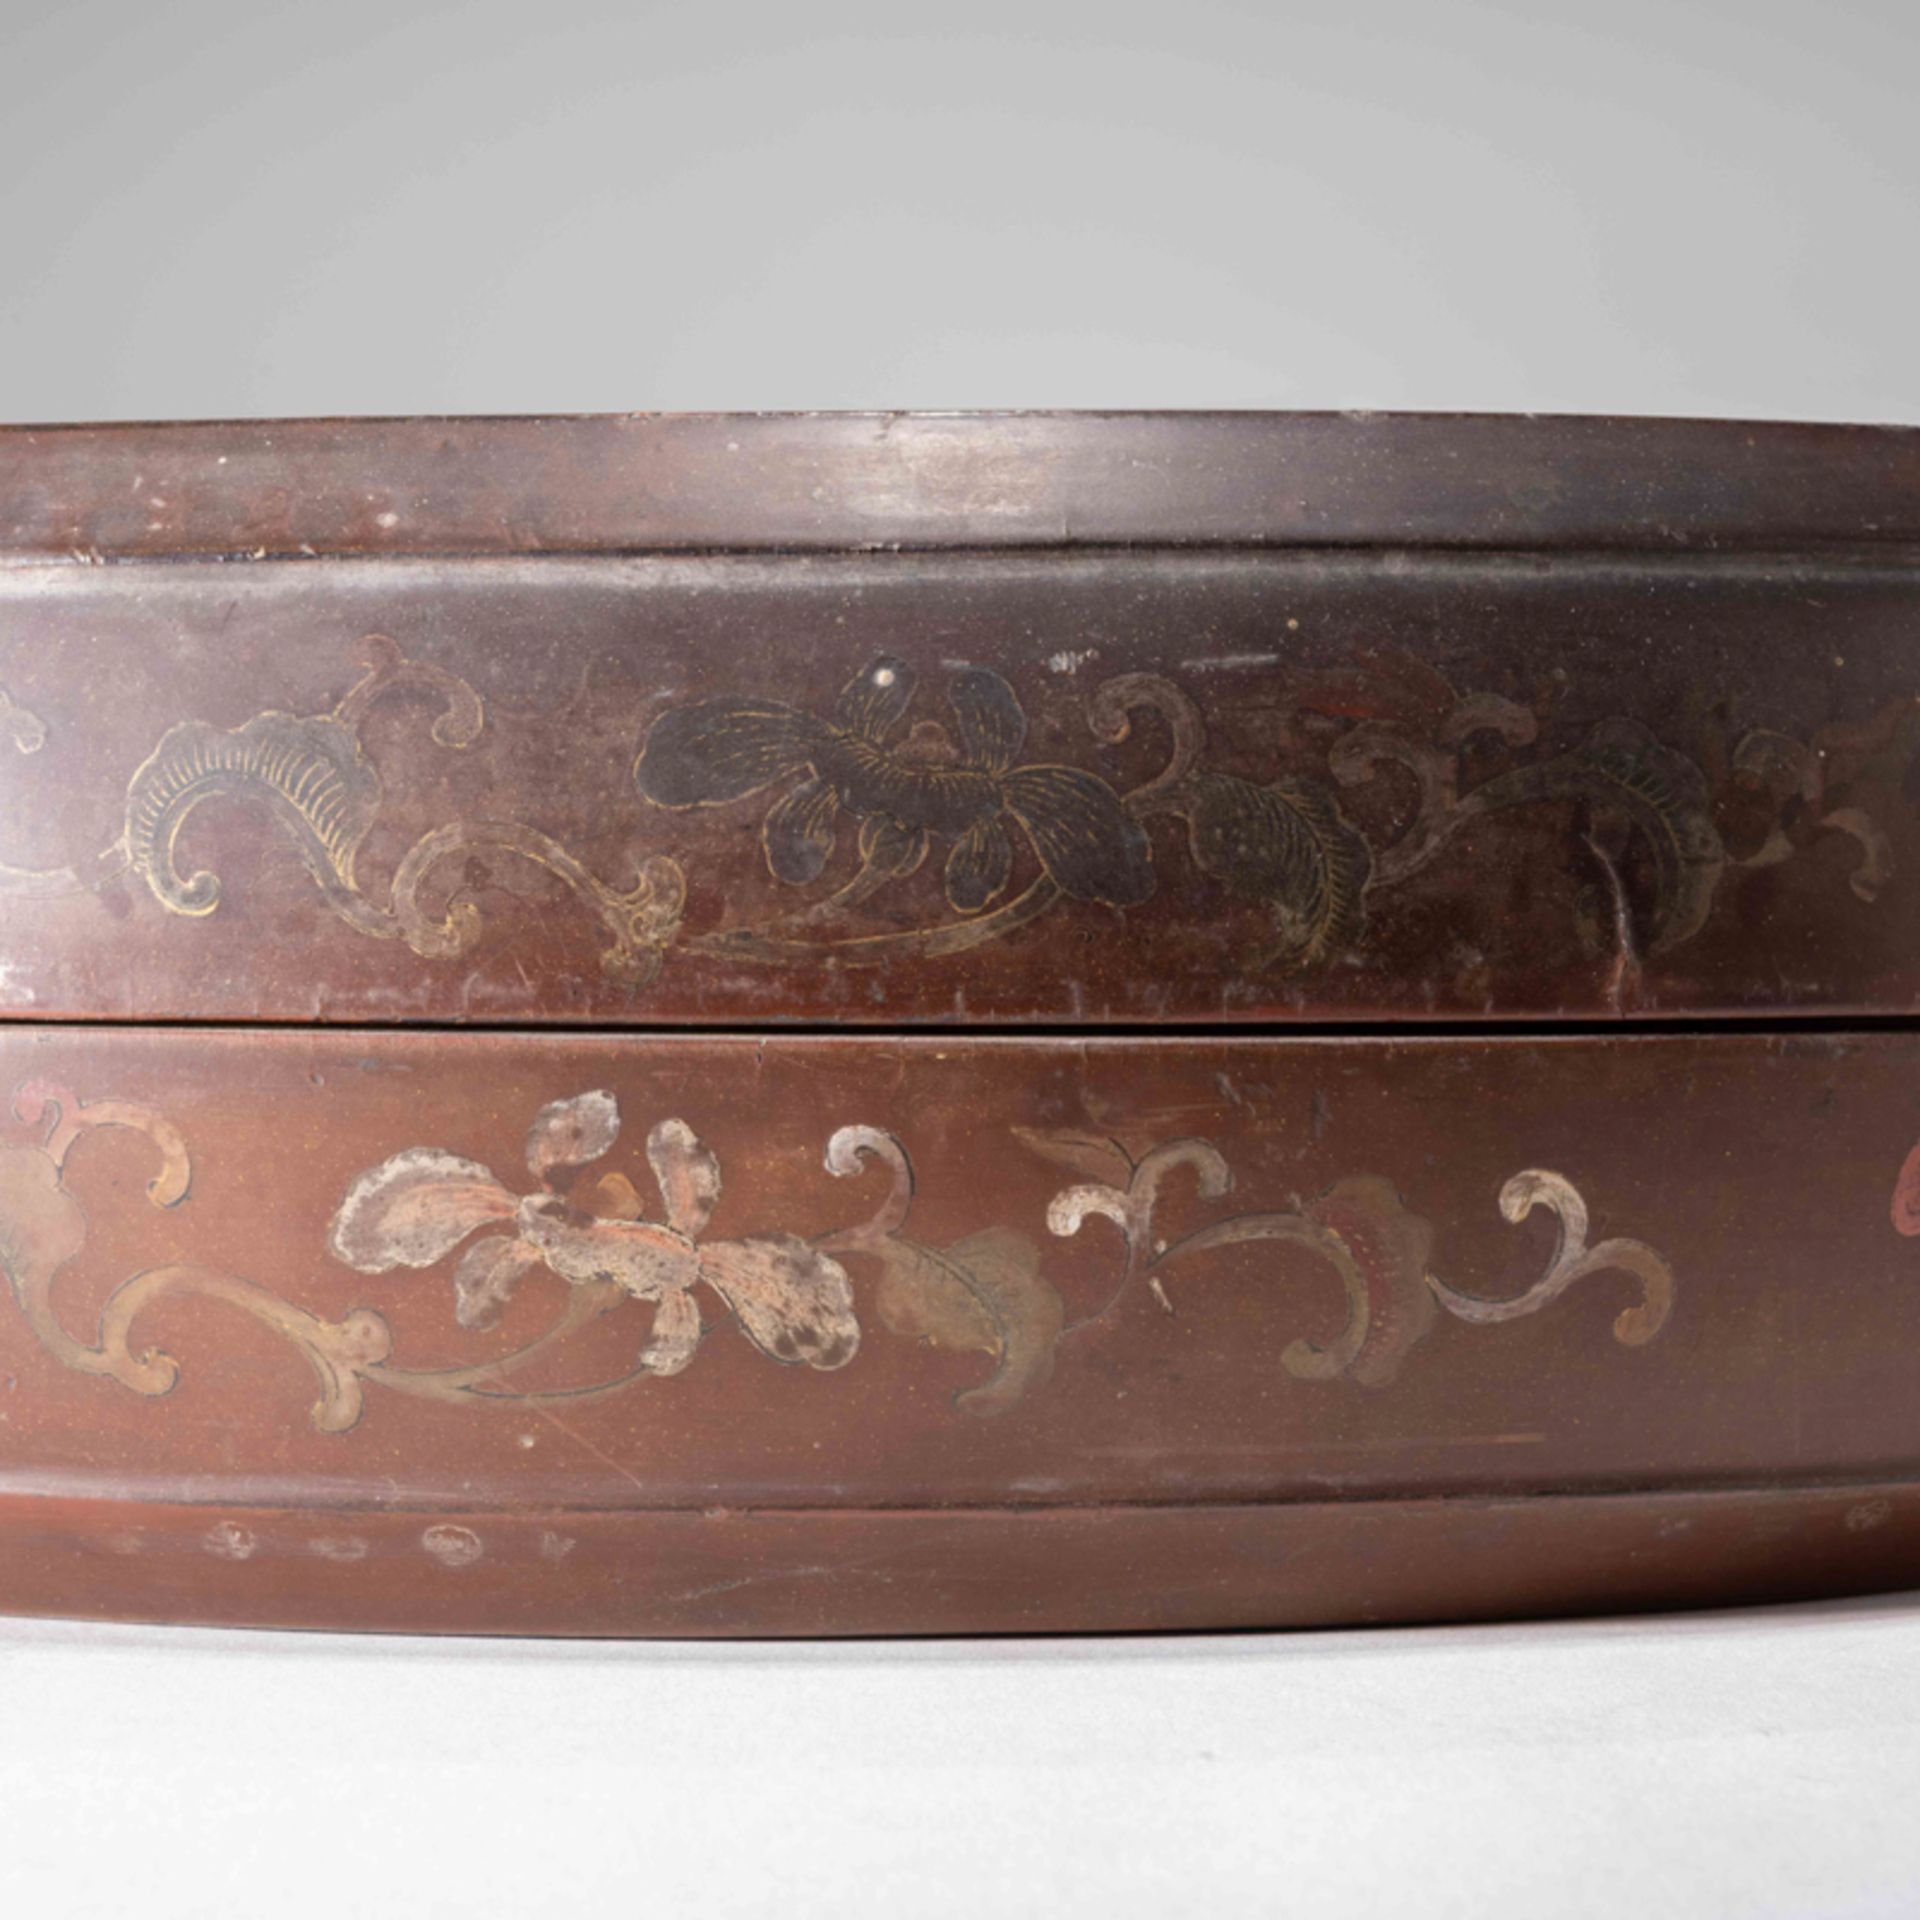 A LARGE CHINESE LACQUER BOX WITH PAINTED BAT DESIGN - Image 4 of 7